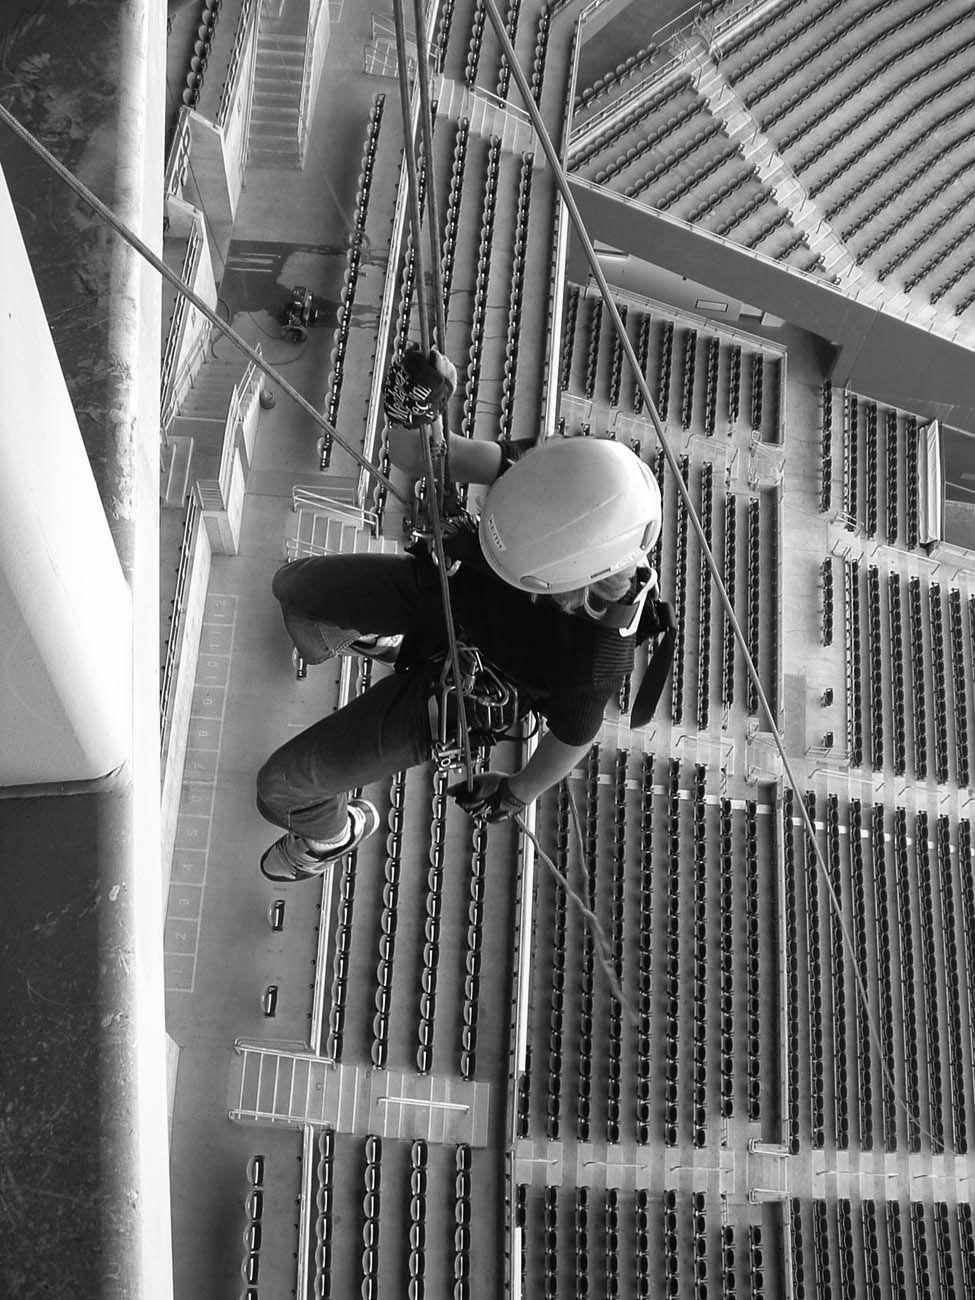 Use of the AZTEK Kit Pg. 6 Vertical Transportation System Especially in the urban/industrial setting, the AZTEK provides a means of safe rappelling, ascending, and belaying.